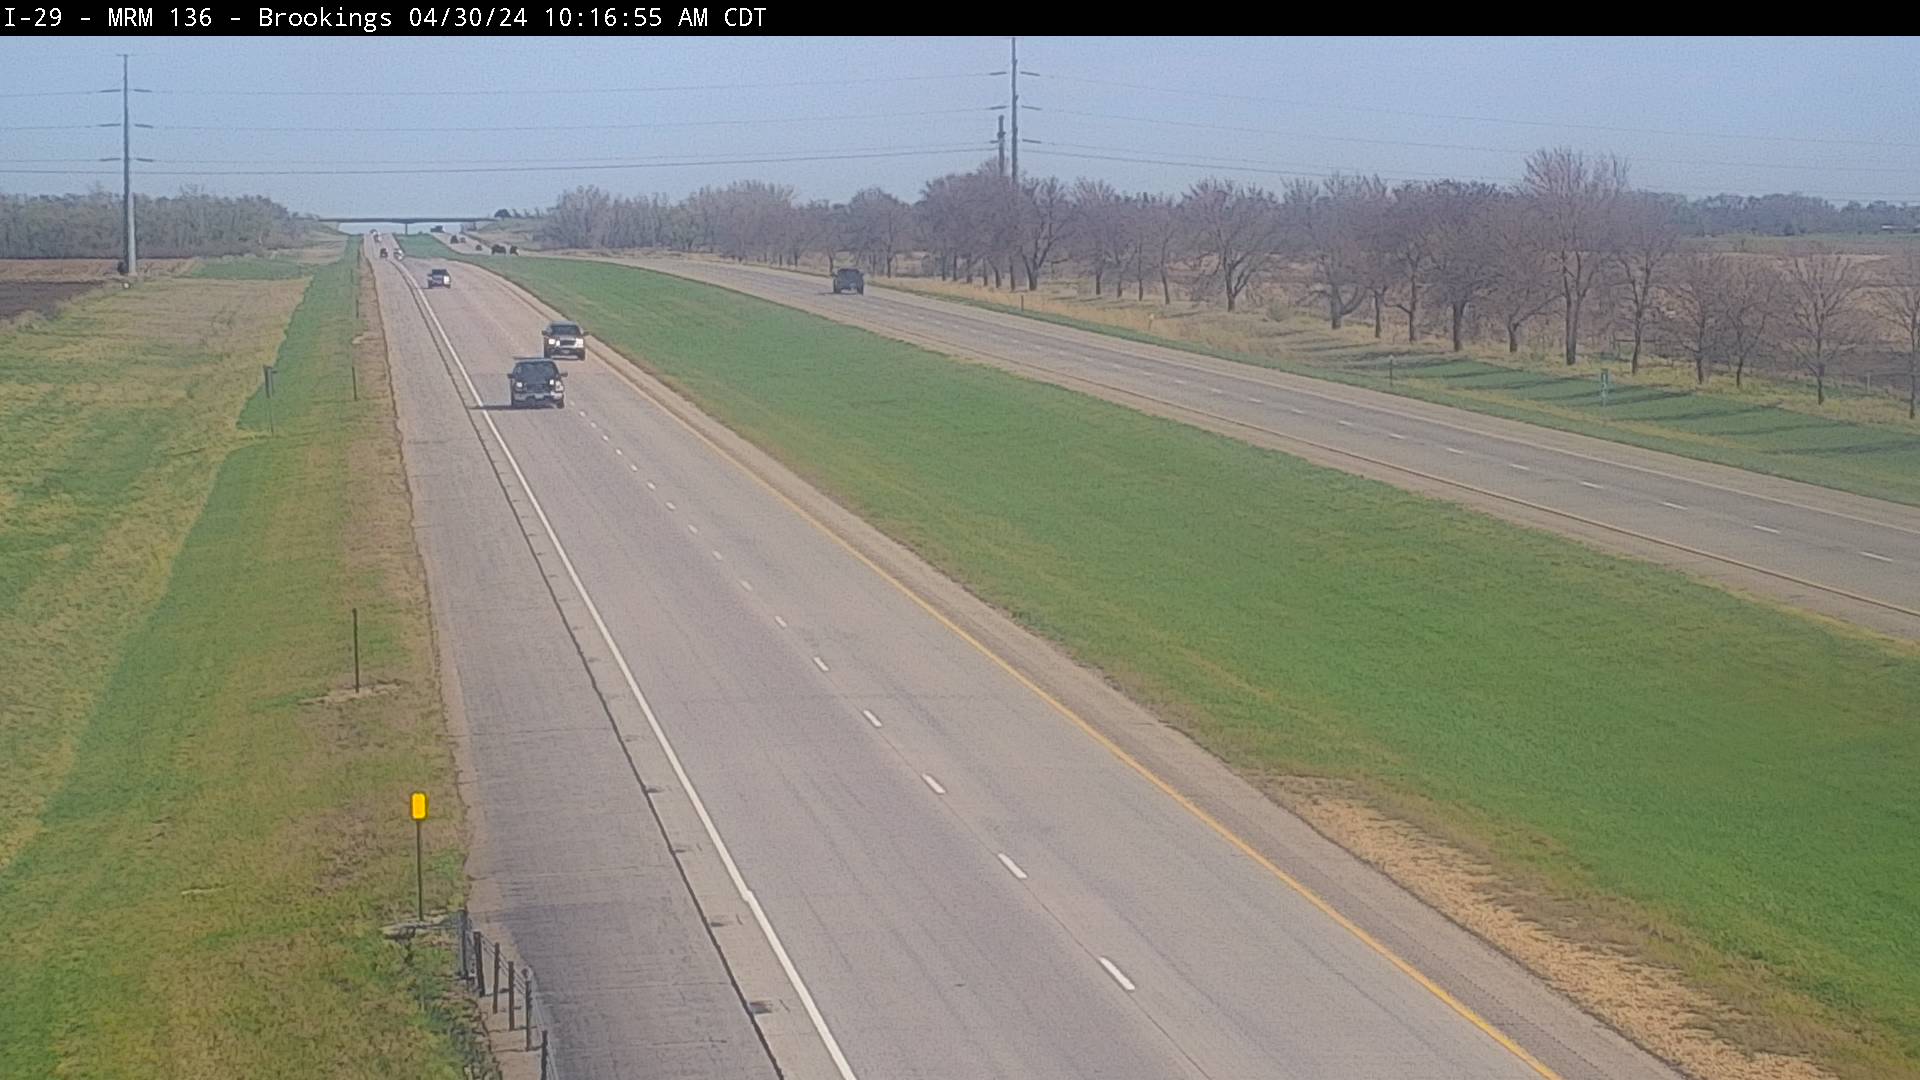 Traffic Cam North of town along I-29 @ MP 135.9 - North Player